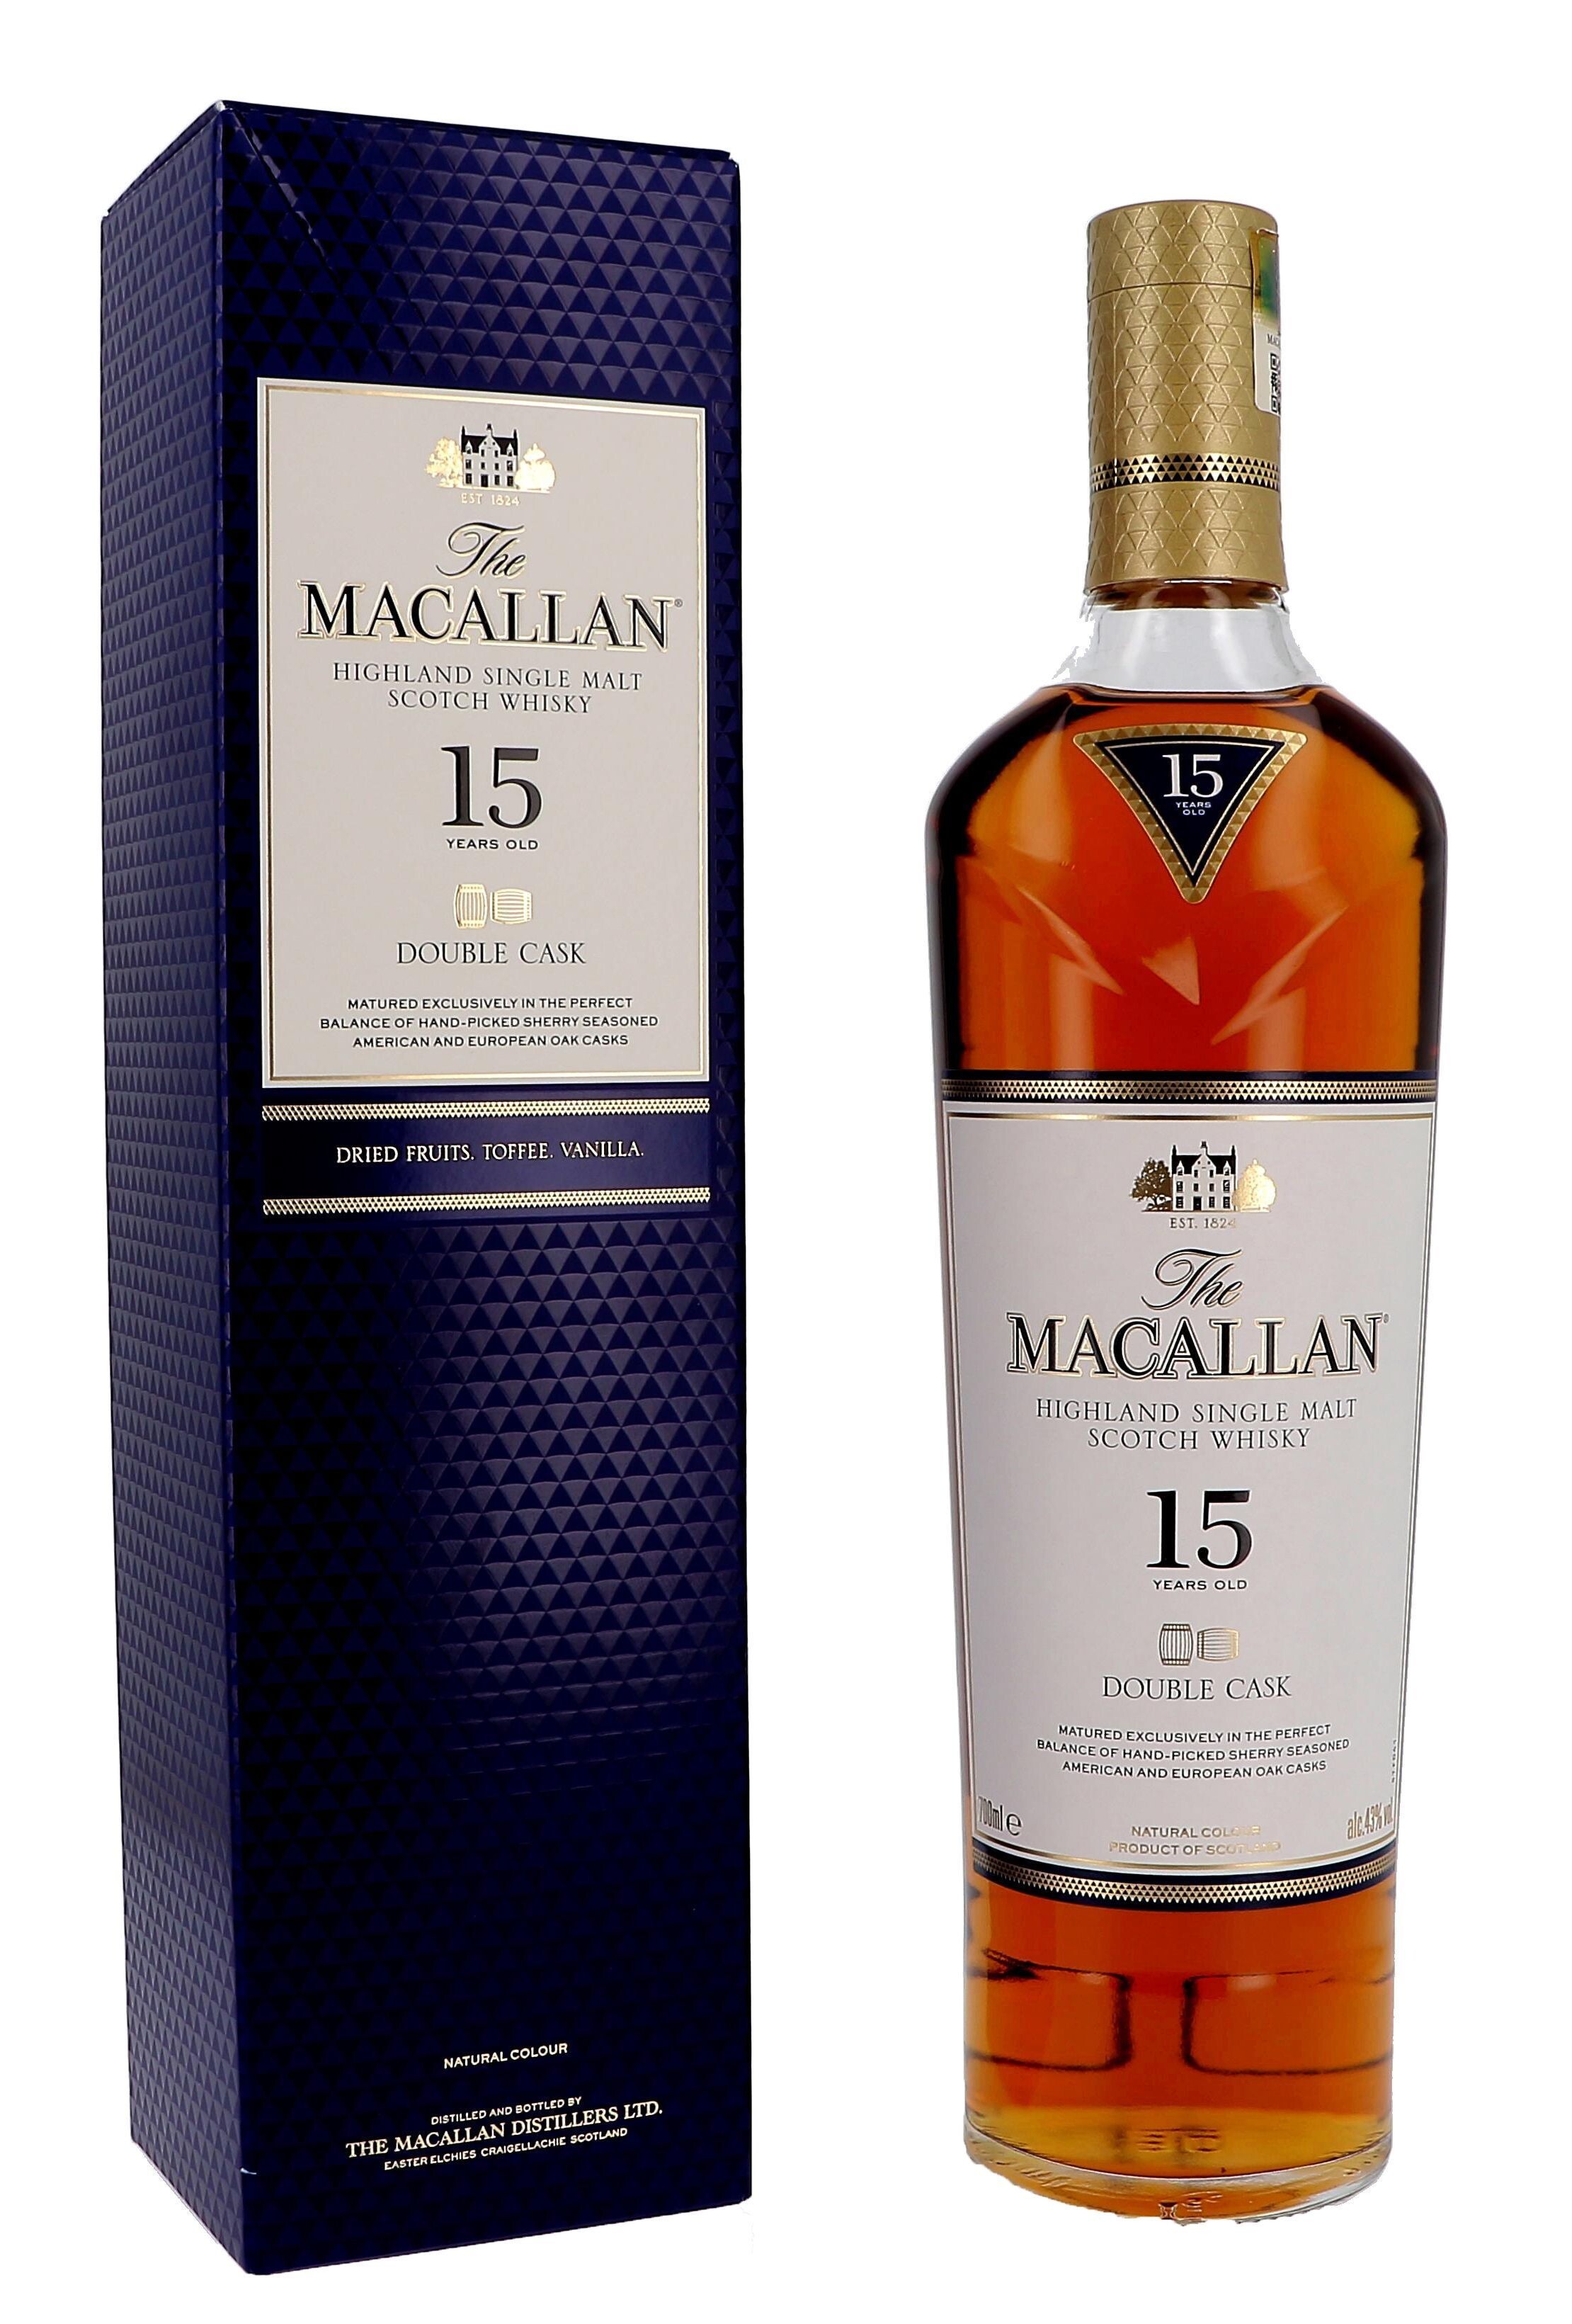 The Macallan 15 Years Double cask 70cl 43% Highland Single Malt Scotch Whisky